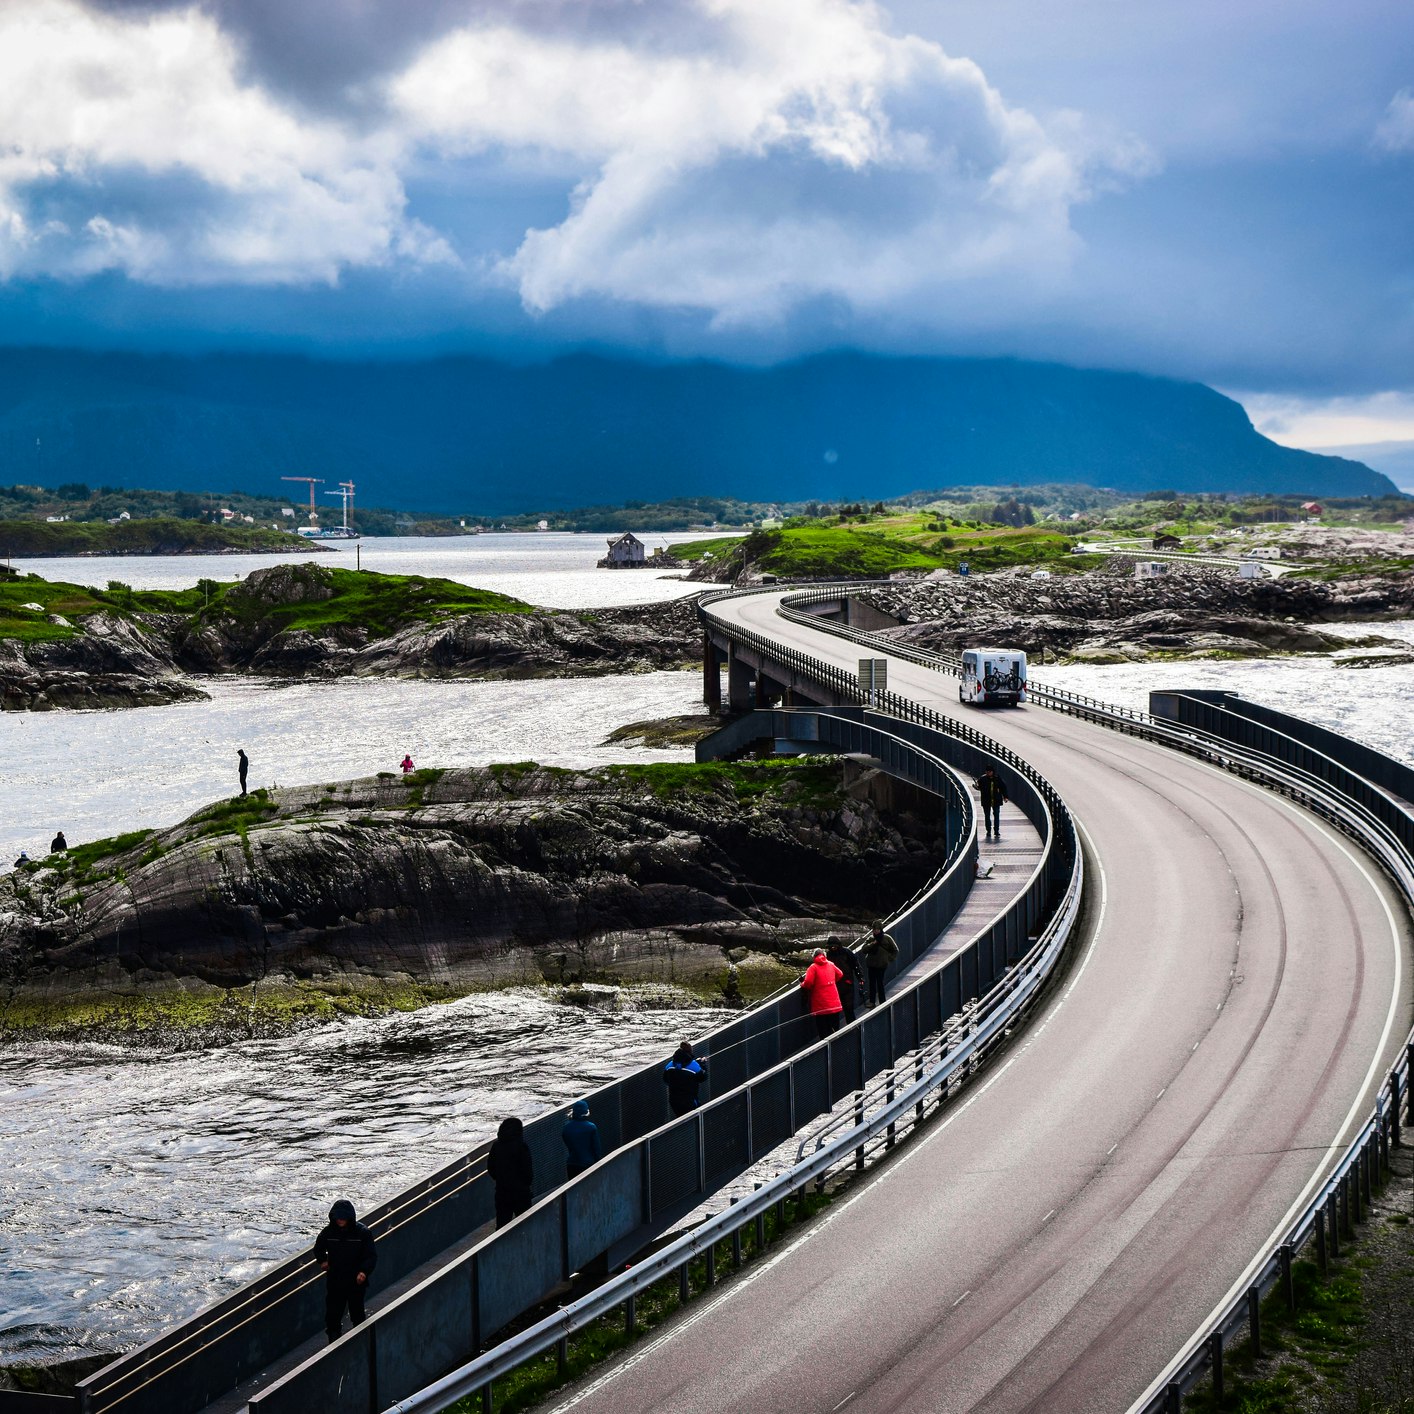 Atlantic Ocean Road, passing through the several small islands in Norwegian Sea, is part of National Tourist Routes of Norway.